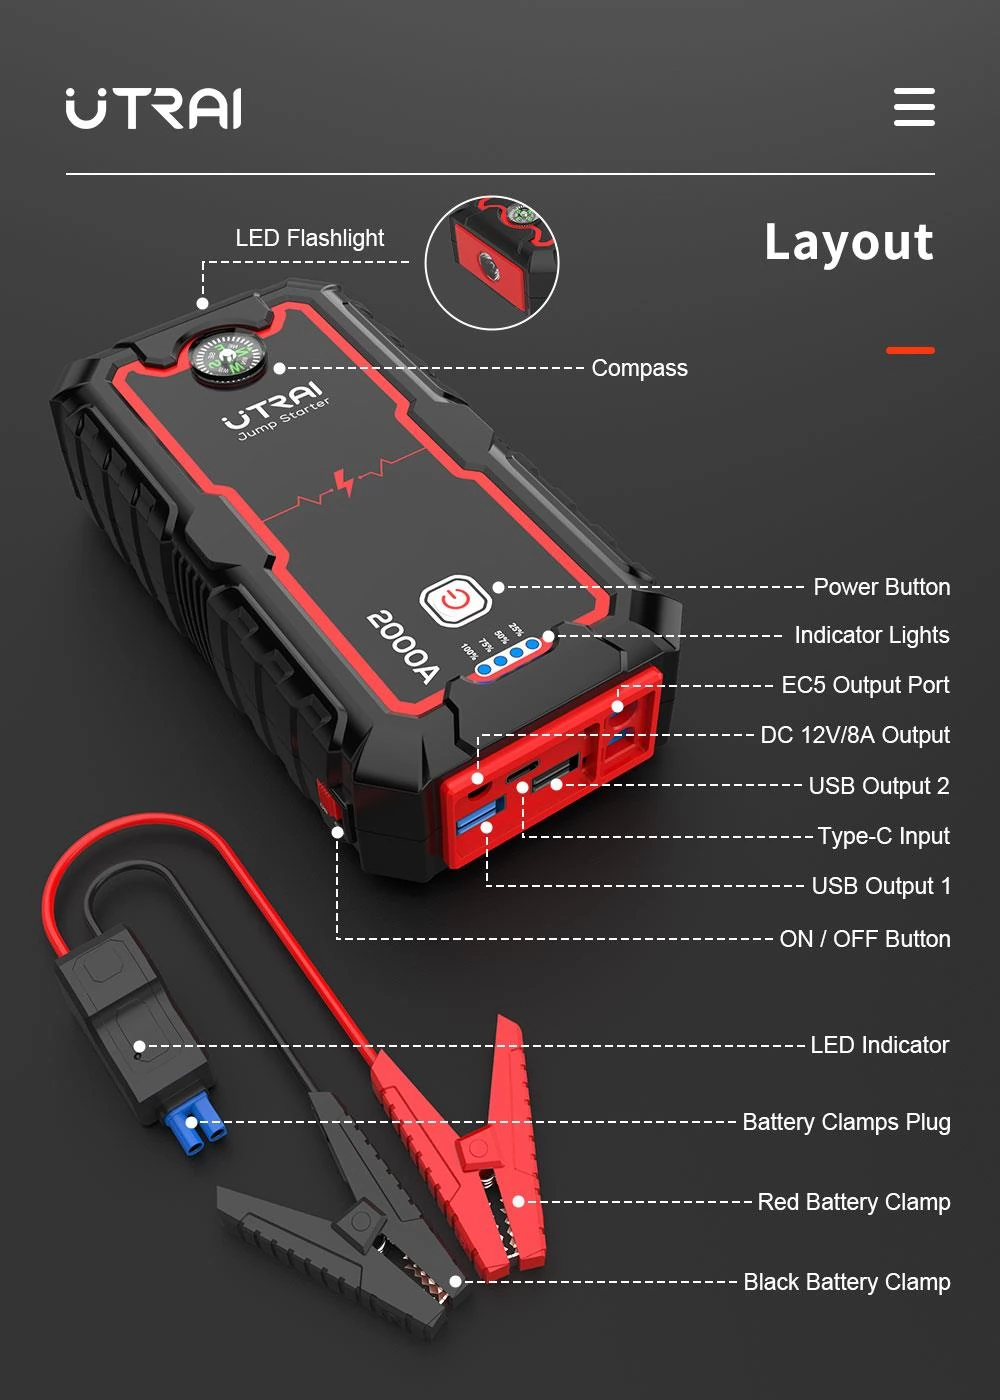 UTRAI Jstar One 22000mAh 2000A Battery Jump Starter, Battery Charger Jump Pack,Start Up To 8.0L GAS or 7.5L DIESEL Engine